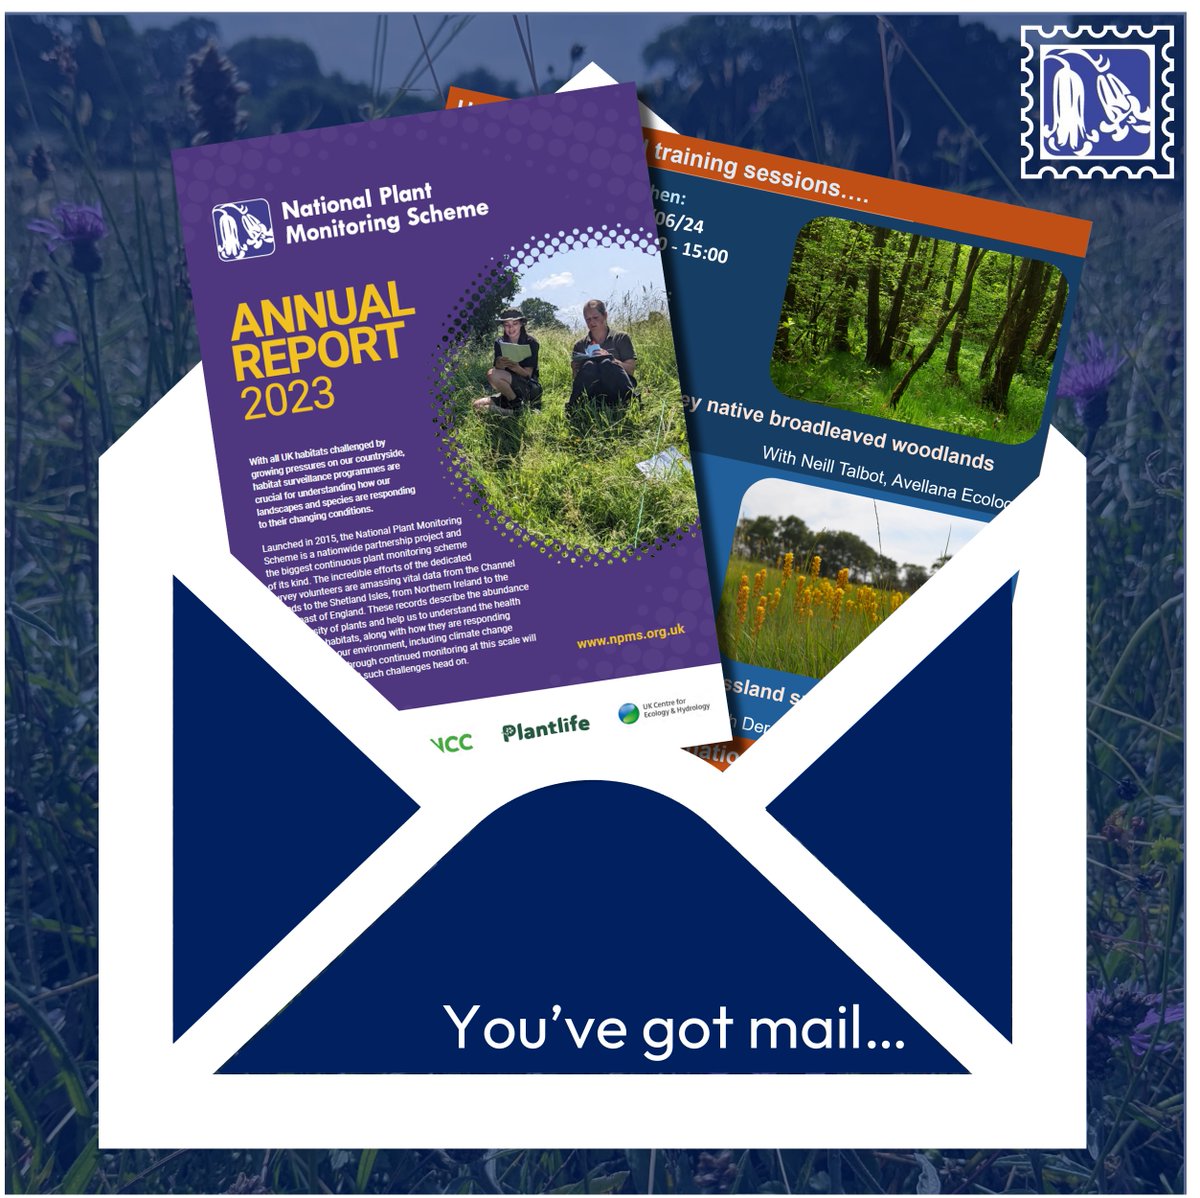 NPMS volunteers & registered supporters, check your inboxes to find news and updates from the scheme. Including the release of our latest Annual report and info on some of our upcoming training opportunities! #NPMS #botany #plantsurveys #citsci